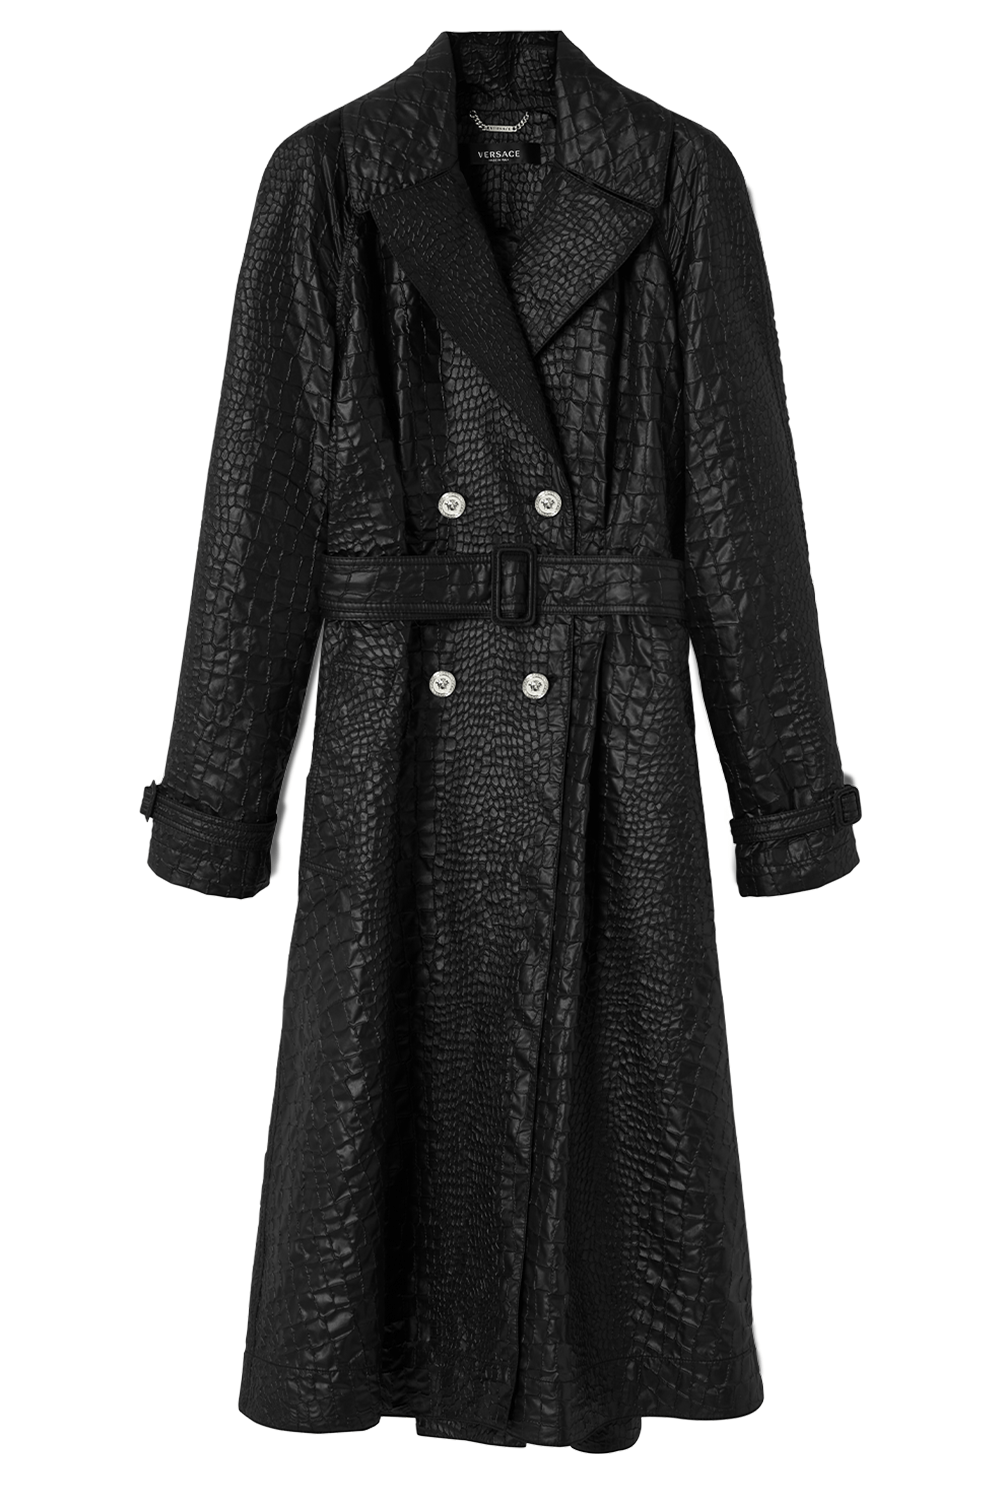 VERSACE-Croc-Lacquered Cloquet Trench Coat-